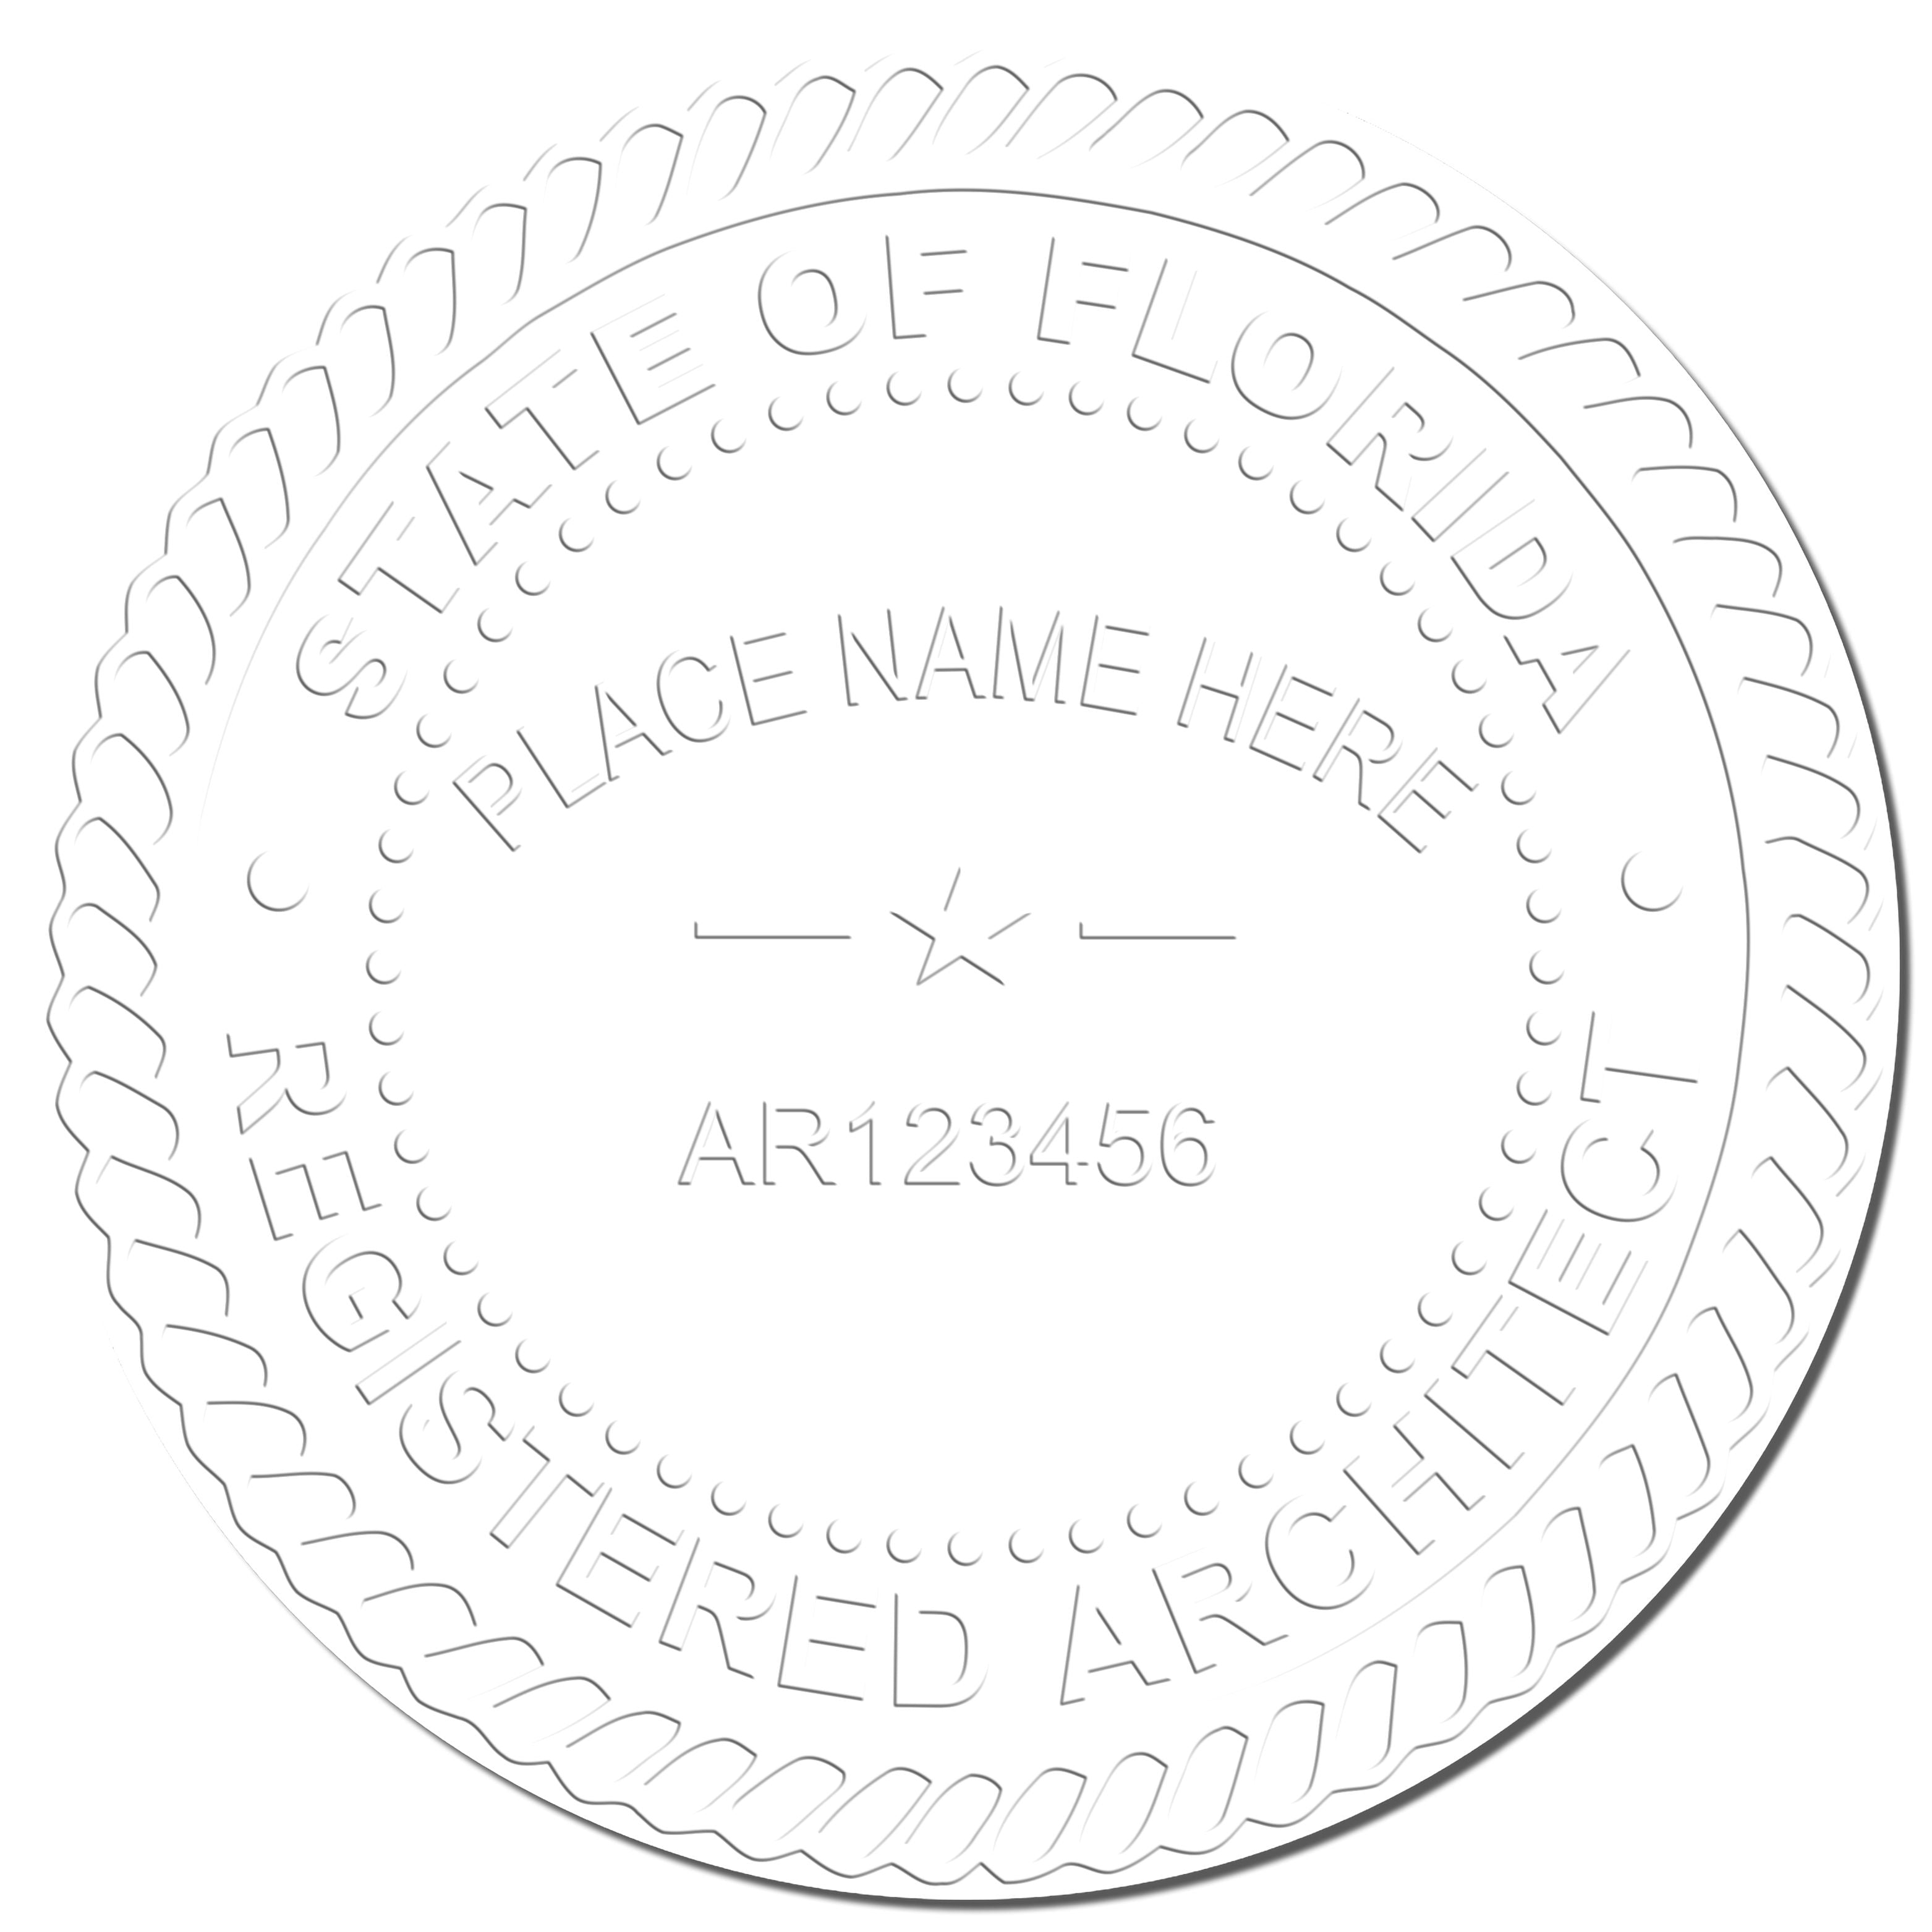 A photograph of the Florida Desk Architect Embossing Seal stamp impression reveals a vivid, professional image of the on paper.